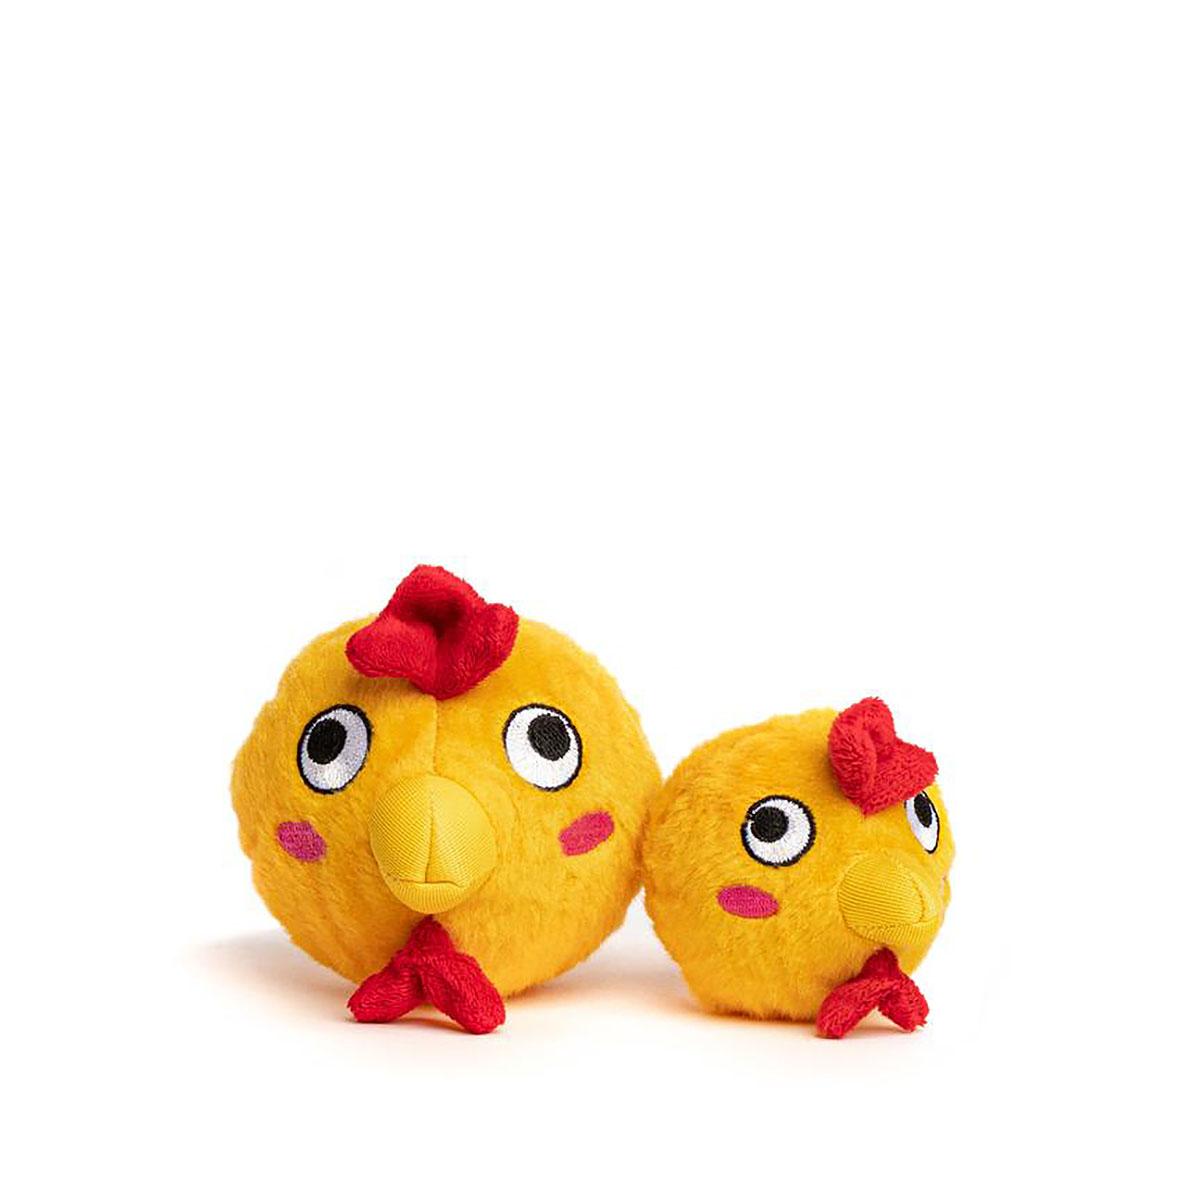 fabdog® Country Critter faball® Dog Toy - Chicken